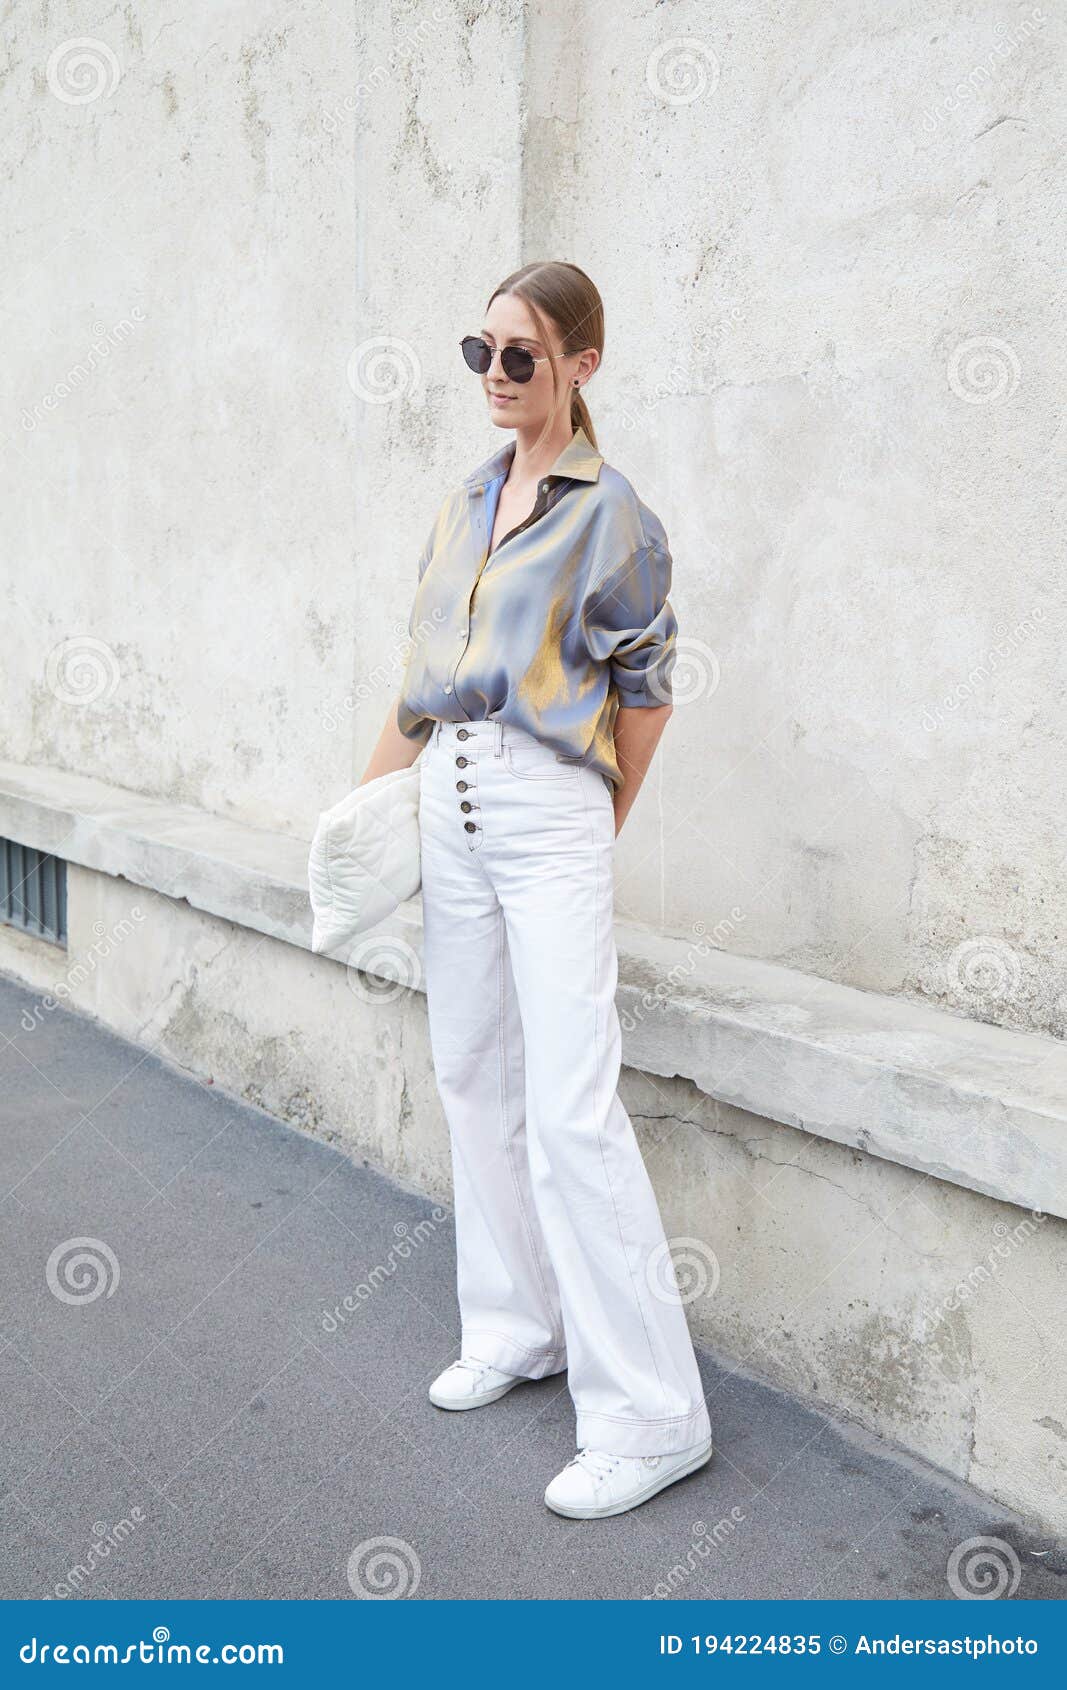 Woman with Gray and Golden Silk Shirt and White Trousers before